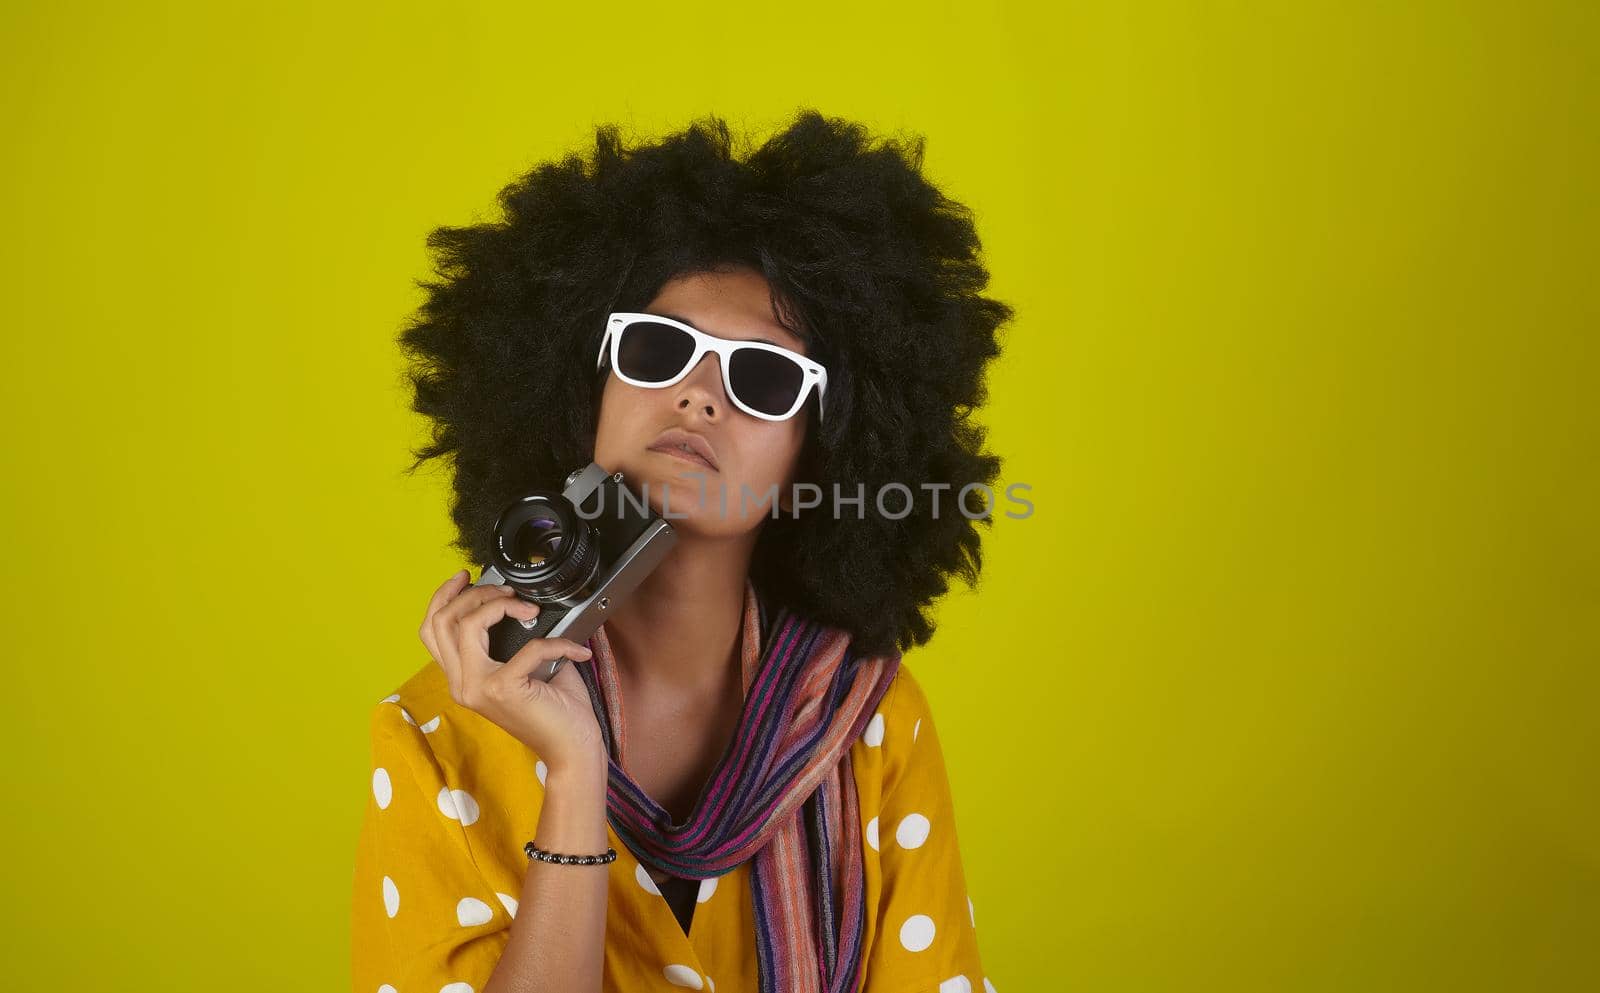 Beautiful woman with curly afro hairstyle on yellow background holkding a retro film camera by bepsimage